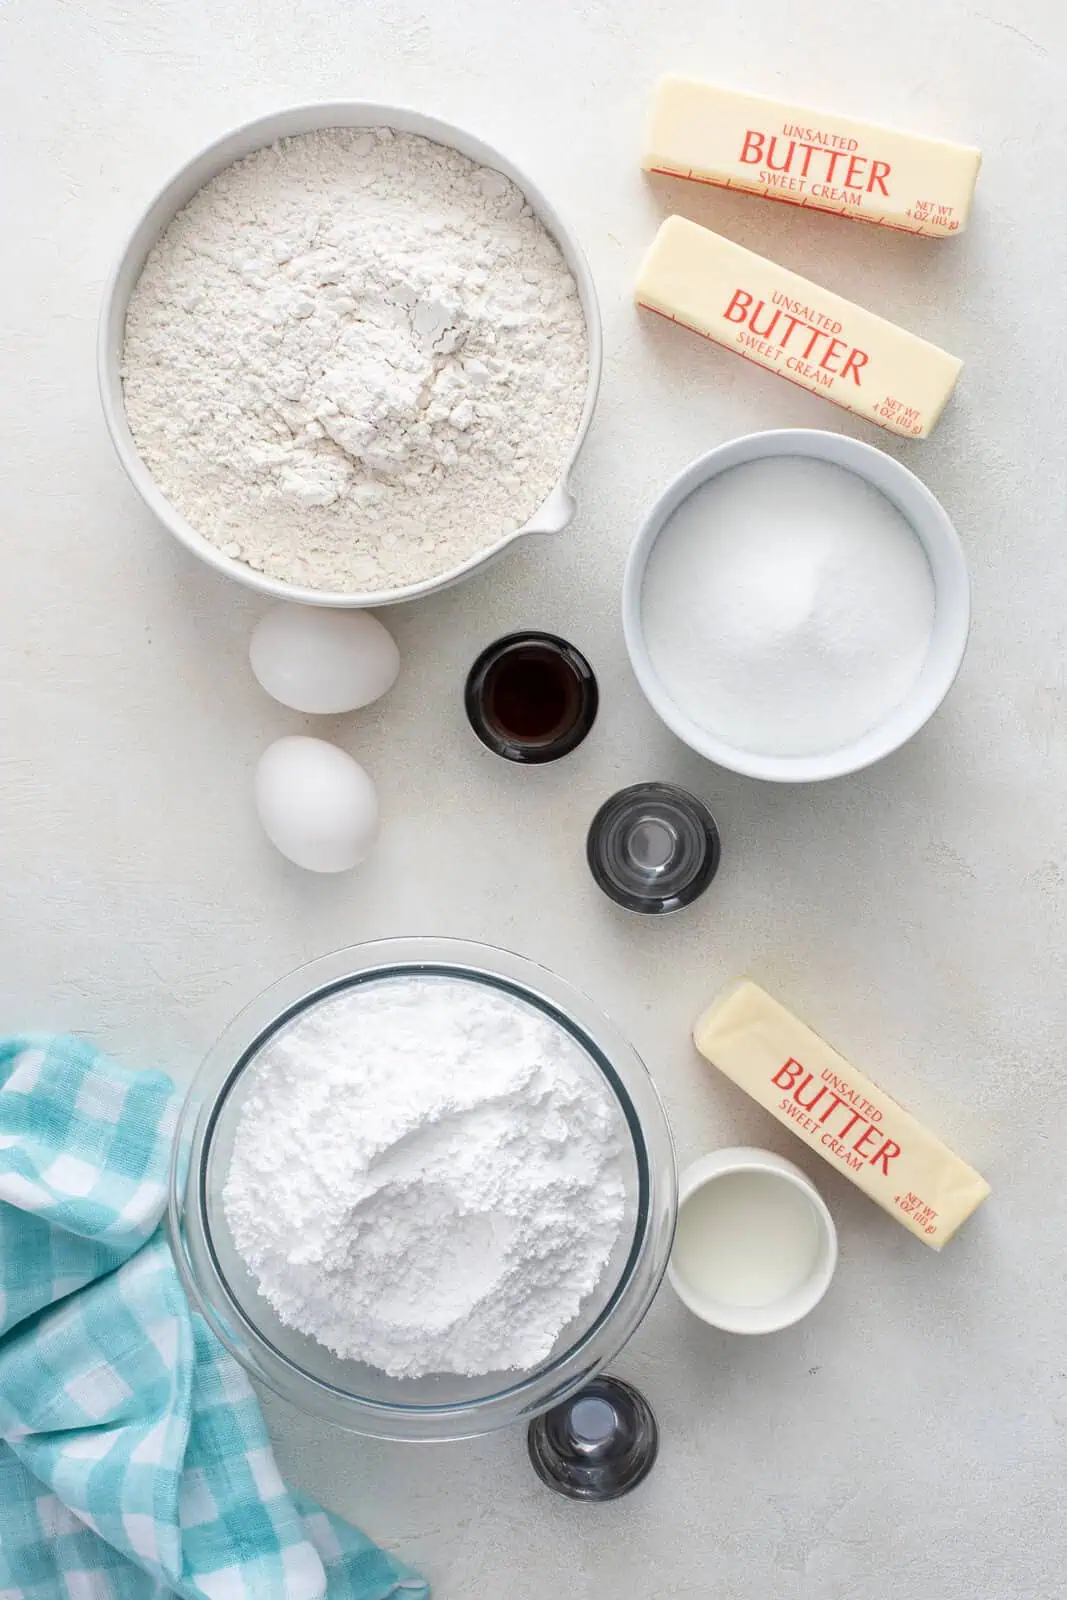 Ingredients for no chill sugar cookies arranged on a light-colored countertop.